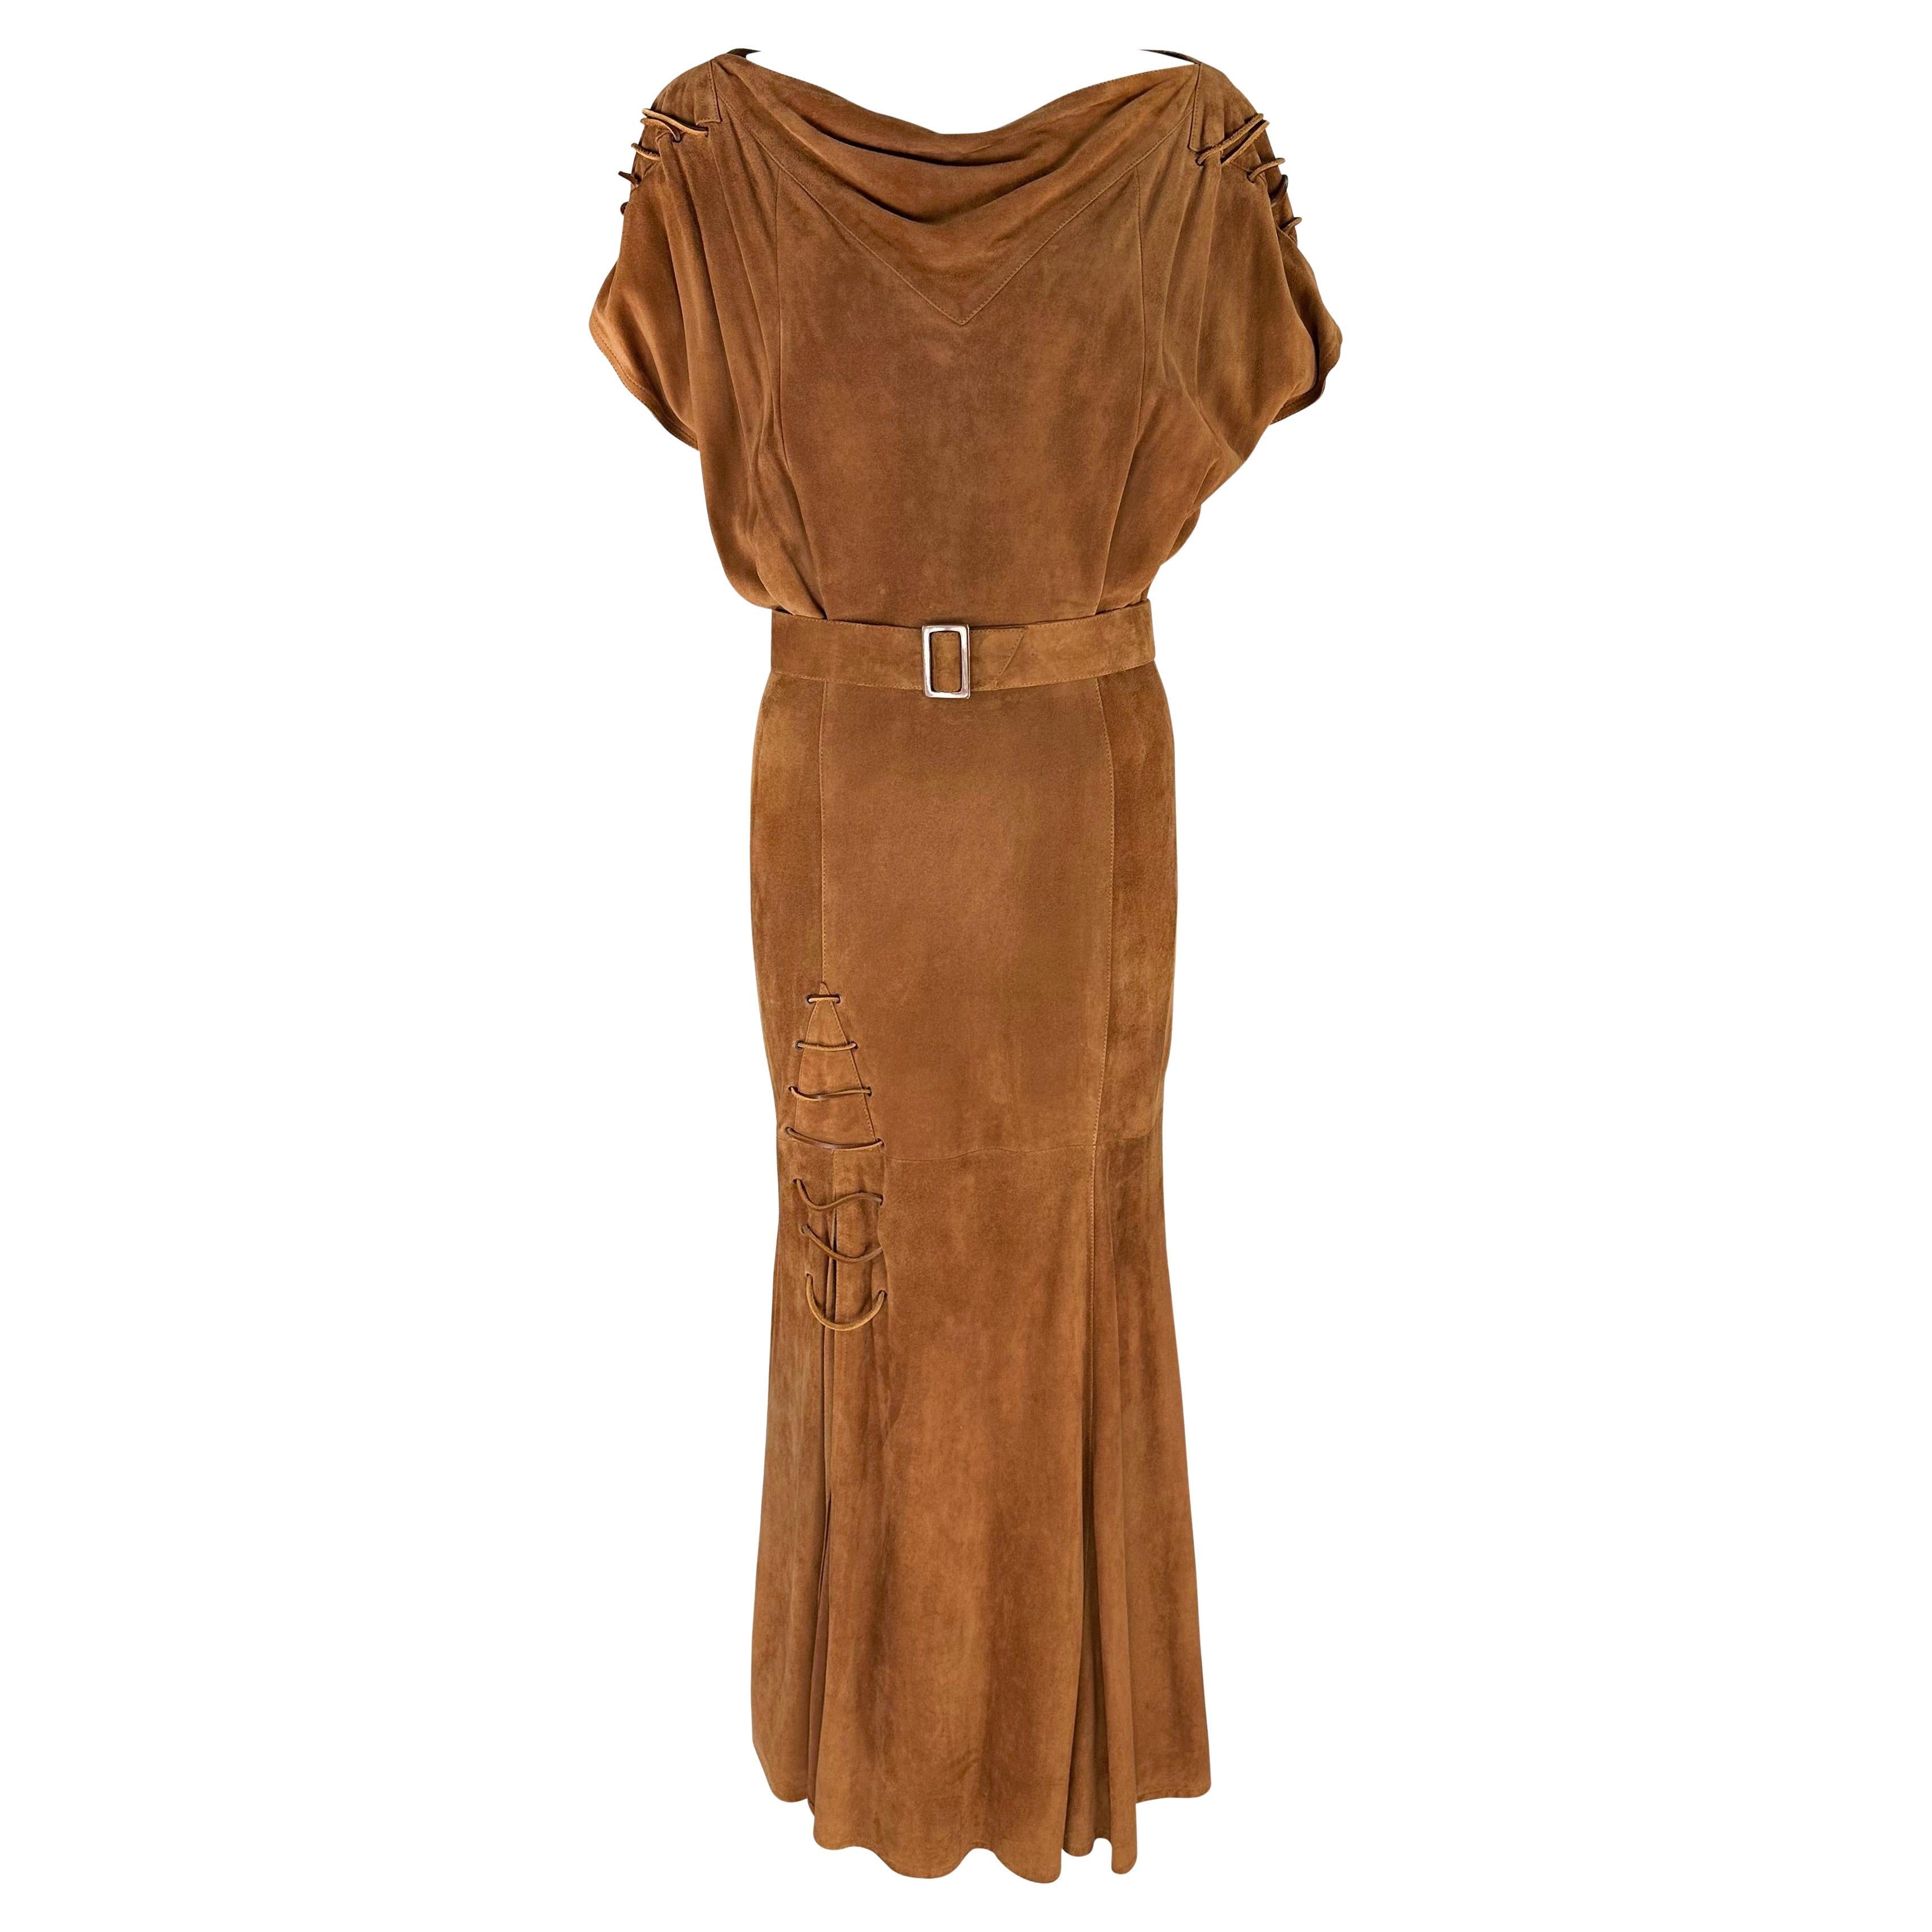 Thierry Mugler Anfang der 1980er Jahre Brown Suede Belted Lace-Up Flare Leather Maxi Dress im Angebot